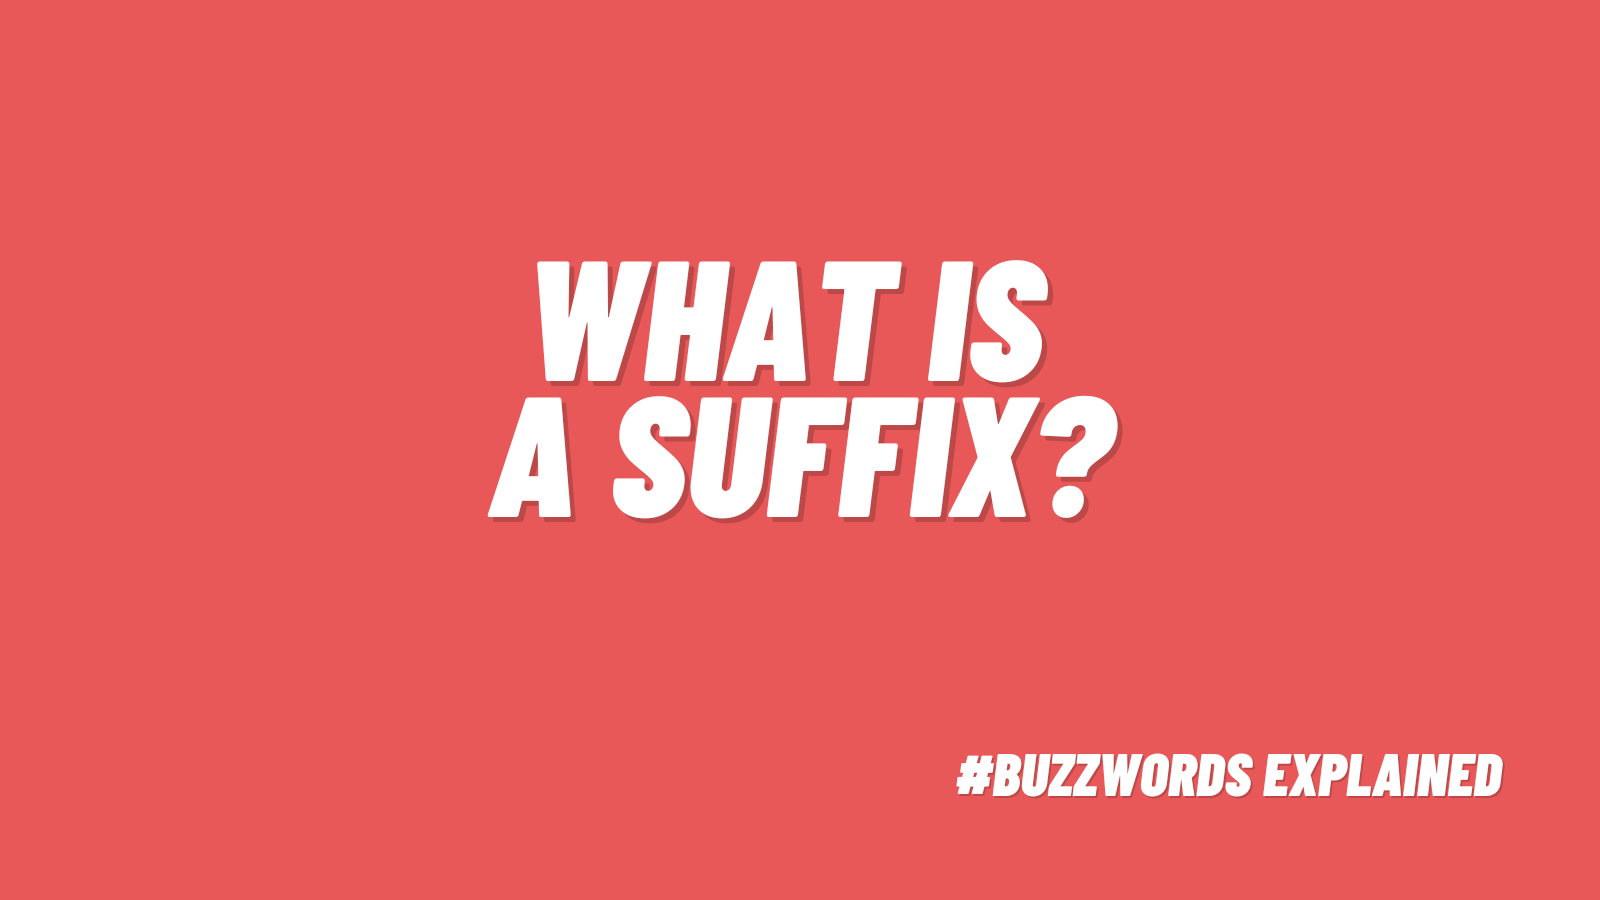 What is a suffix?